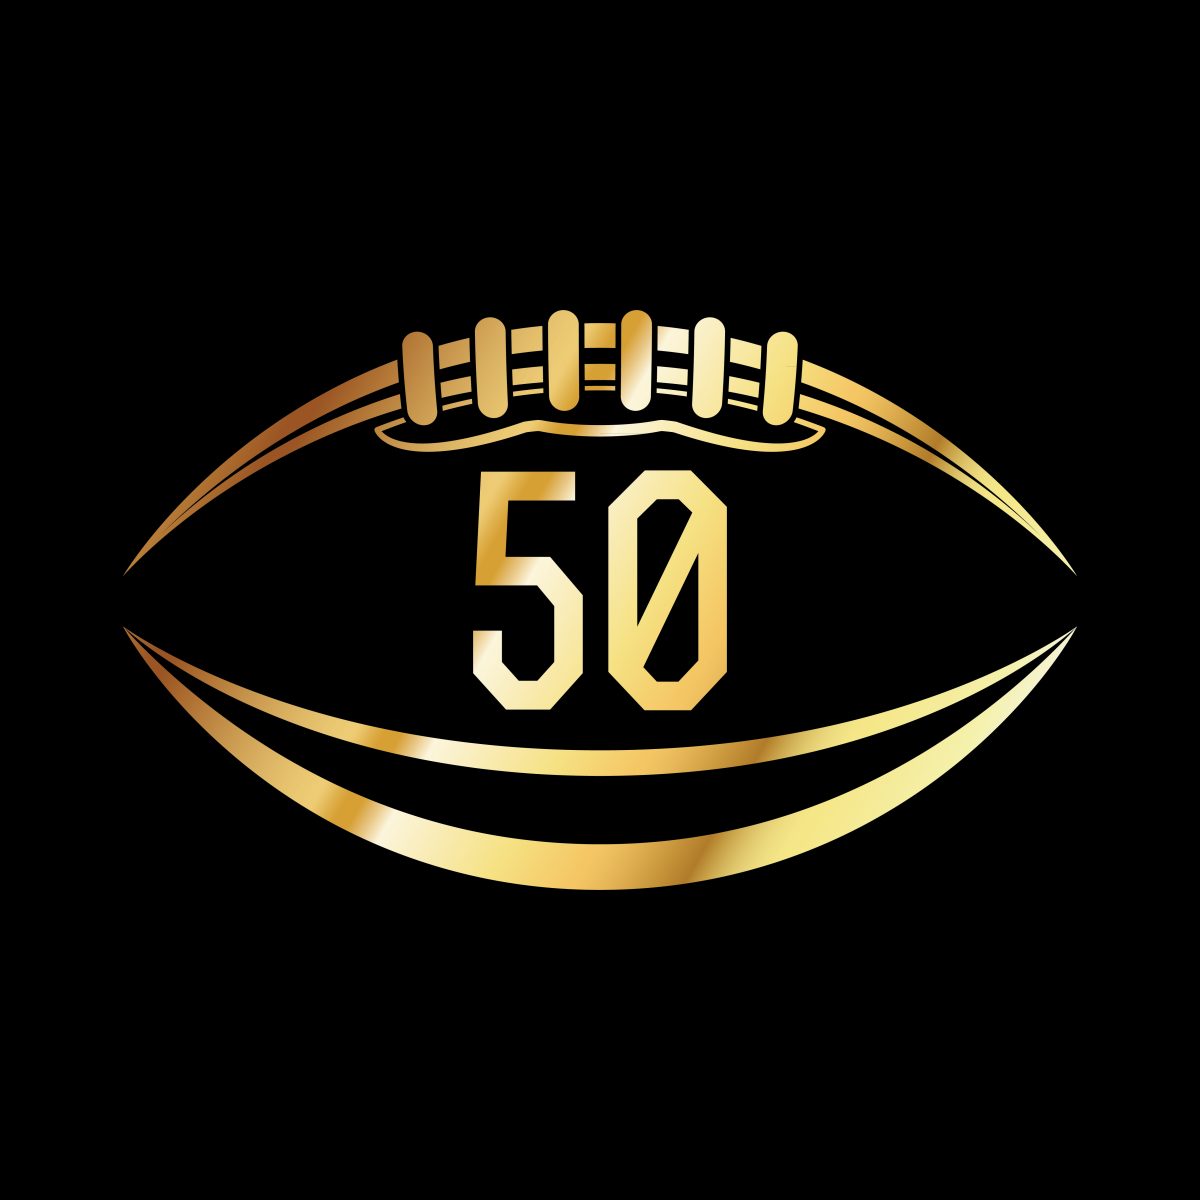 Sb50, Broadcast Consulting, Event Production Company, Event Production, Live Event Production, Video Production, Production Companies, Production Services, Live Production, Video Productions, Video Production Companies, Live Video Production Companies, Video Streaming